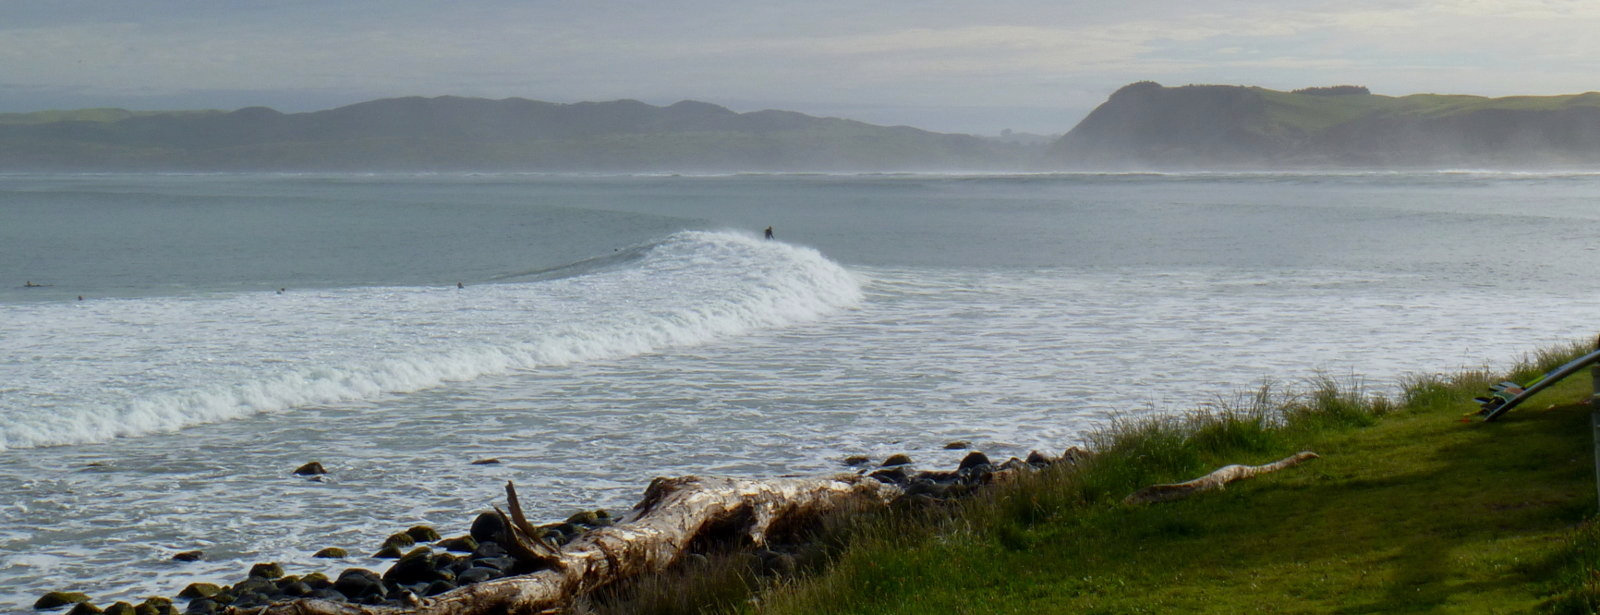 About UP Surf Coaching, a surf school in Raglan, New Zealand.